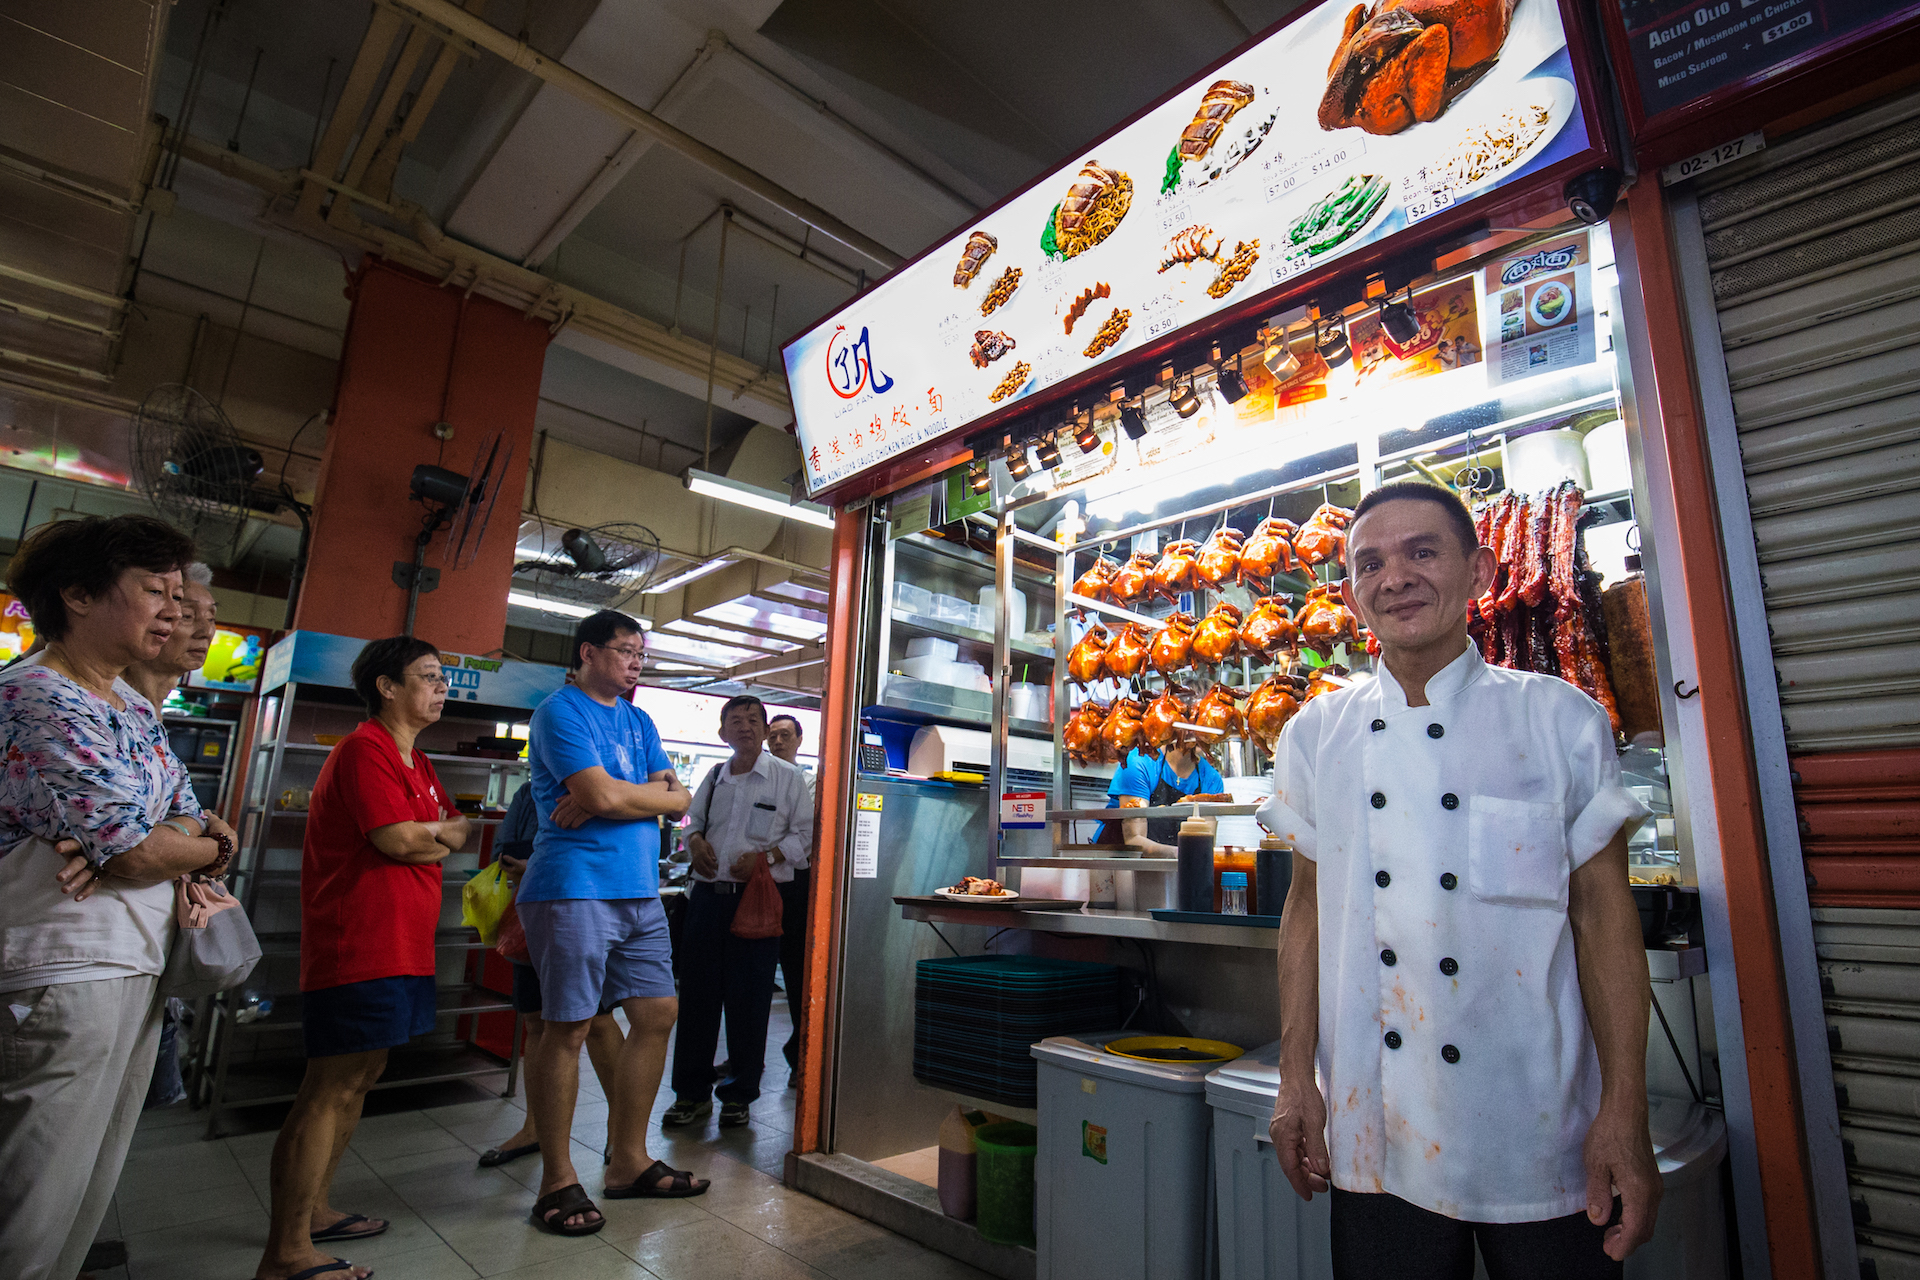 Chan Hong Meng poses for a photo at his Hong Kong Chicken Rice and Noodle stall at Chinatown Complex on July 24, 2016 in Singapore. Chan was awarded a one-star rating by Michelin on July 21, making him one of the first street food hawkers to be awarded in the guide's history.